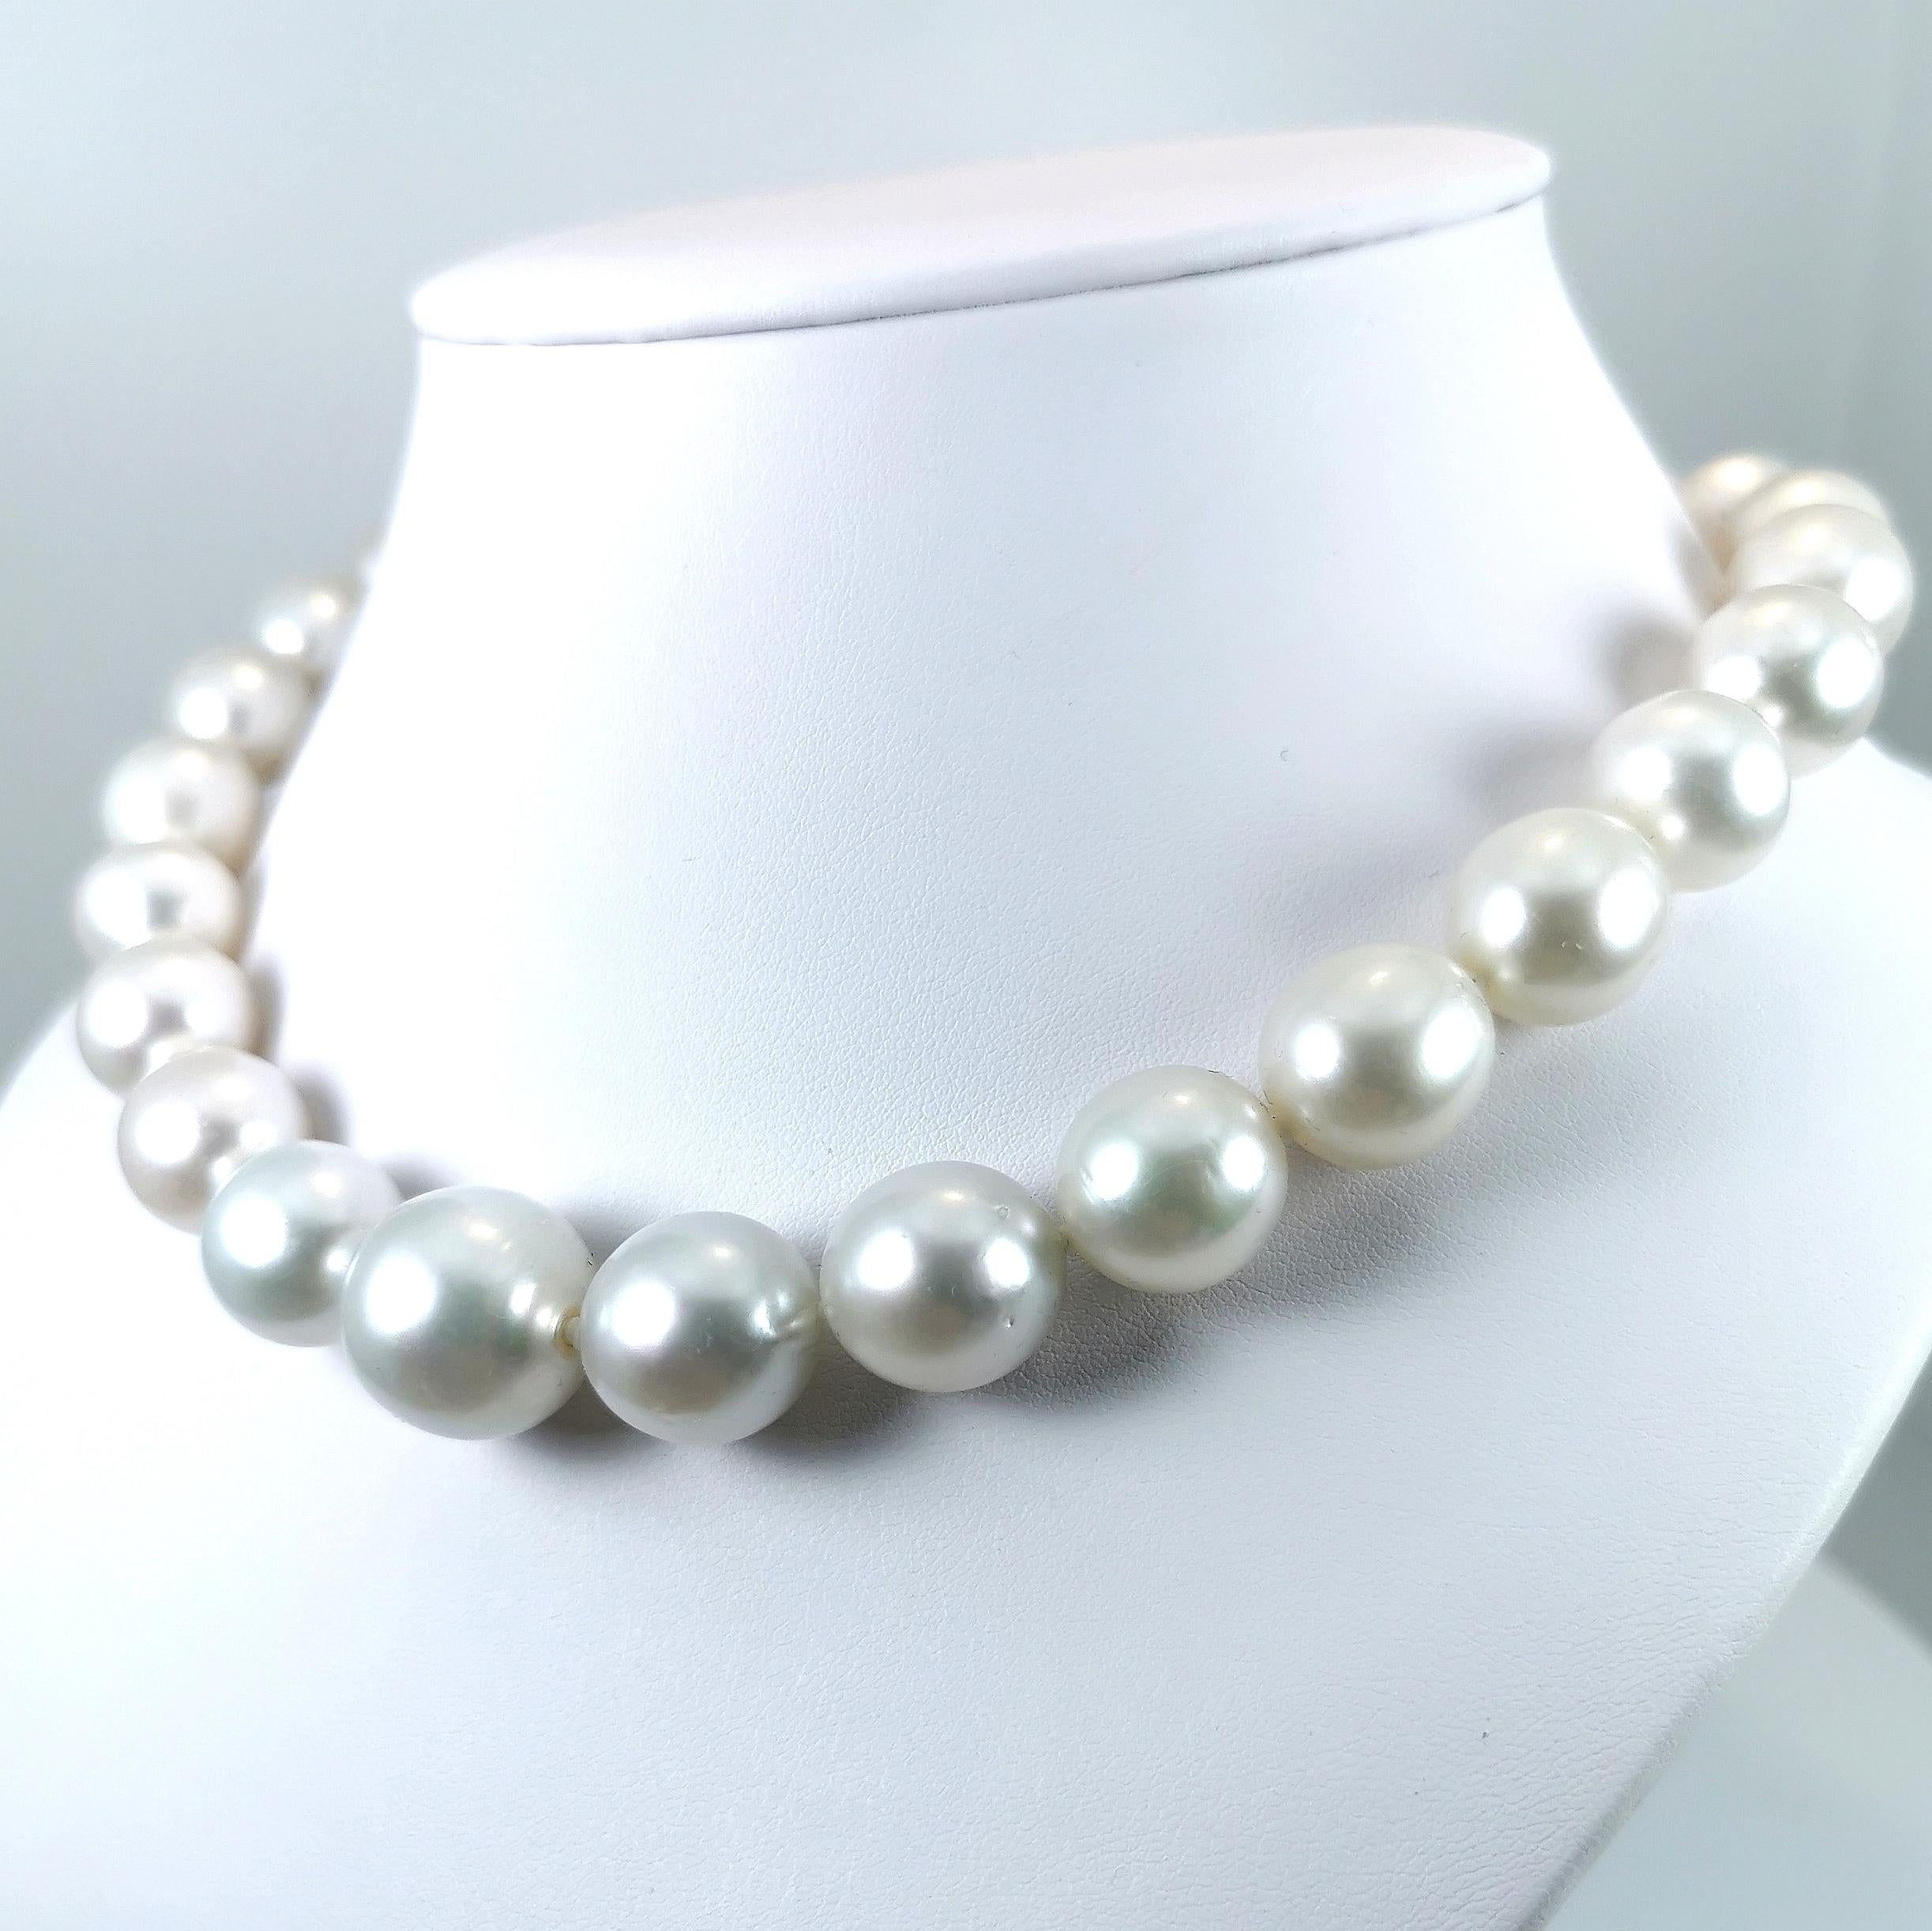 Exceptional big necklace australian Southsea cultured pearls near round shape - Sizes Ø 12,5 x 17,2 MM natural white silver colour. Mounted on silk thread with knots between each pearl and  a 925%o Silver clasp with hallmarks.

Pearl size : Ø 12,5 x